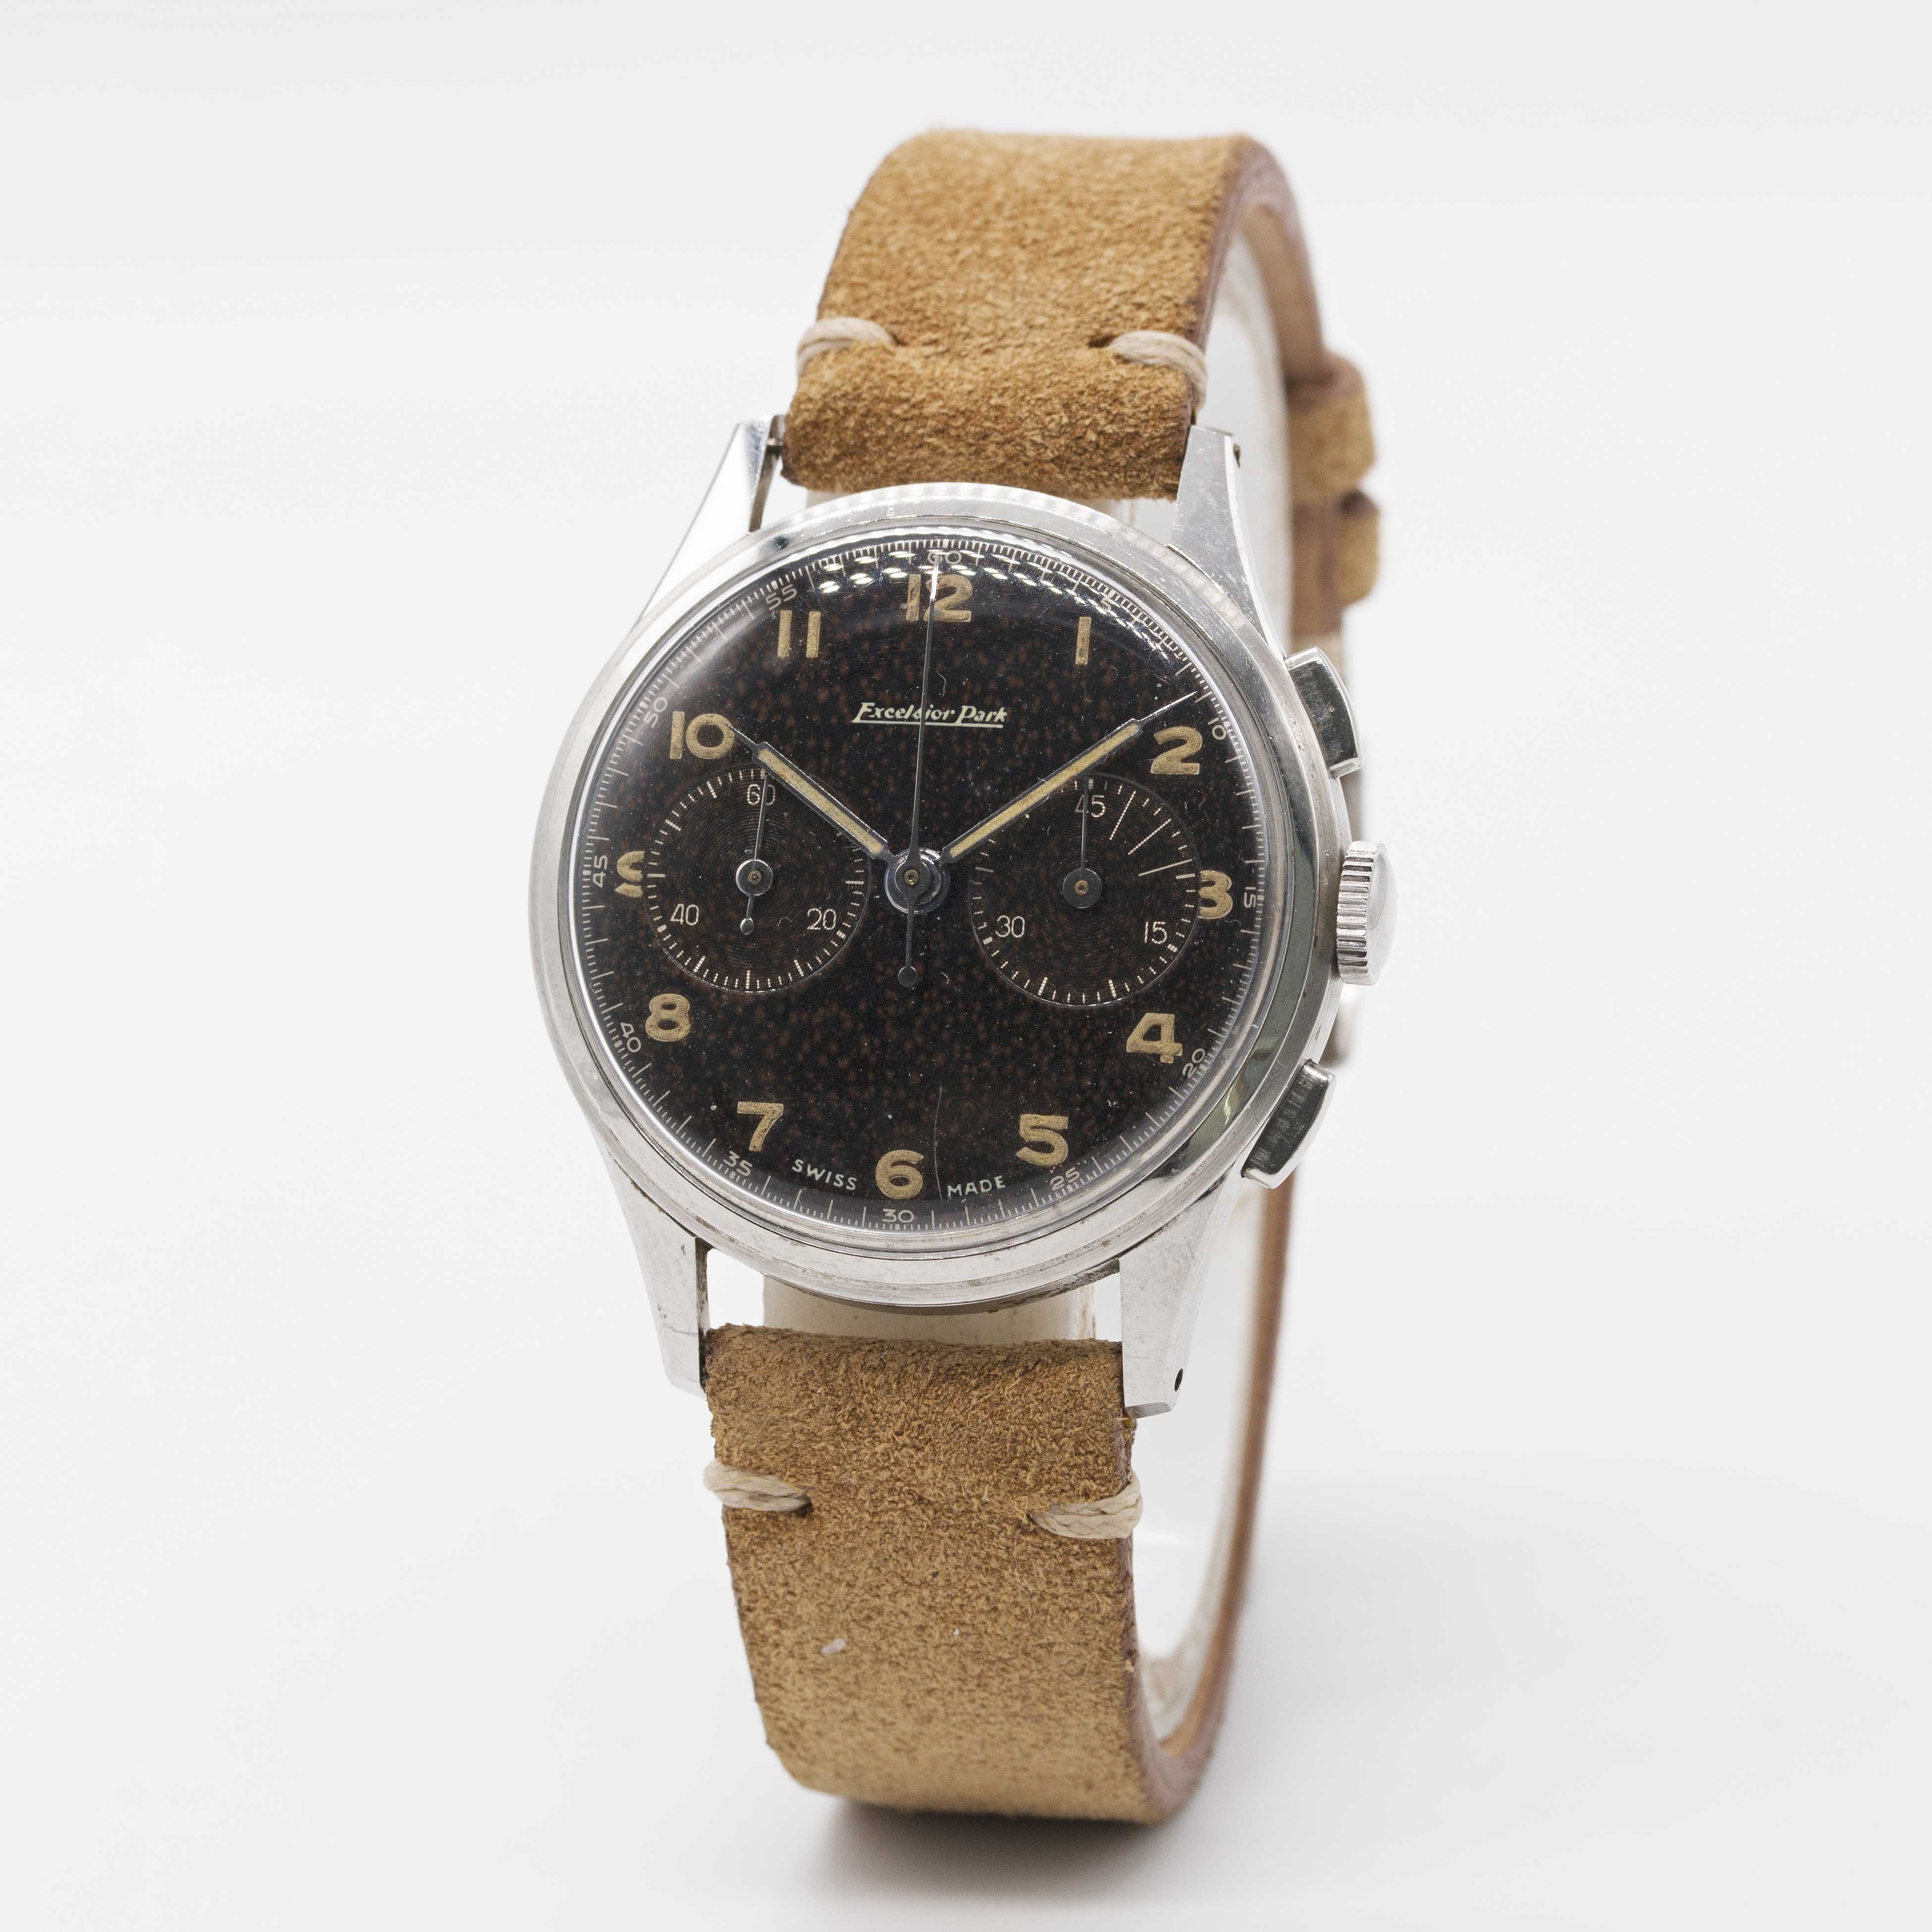 A GENTLEMAN'S STAINLESS STEEL EXCELSIOR PARK CHRONOGRAPH WRIST WATCH CIRCA 1950s, WITH GLOSS - Image 3 of 8